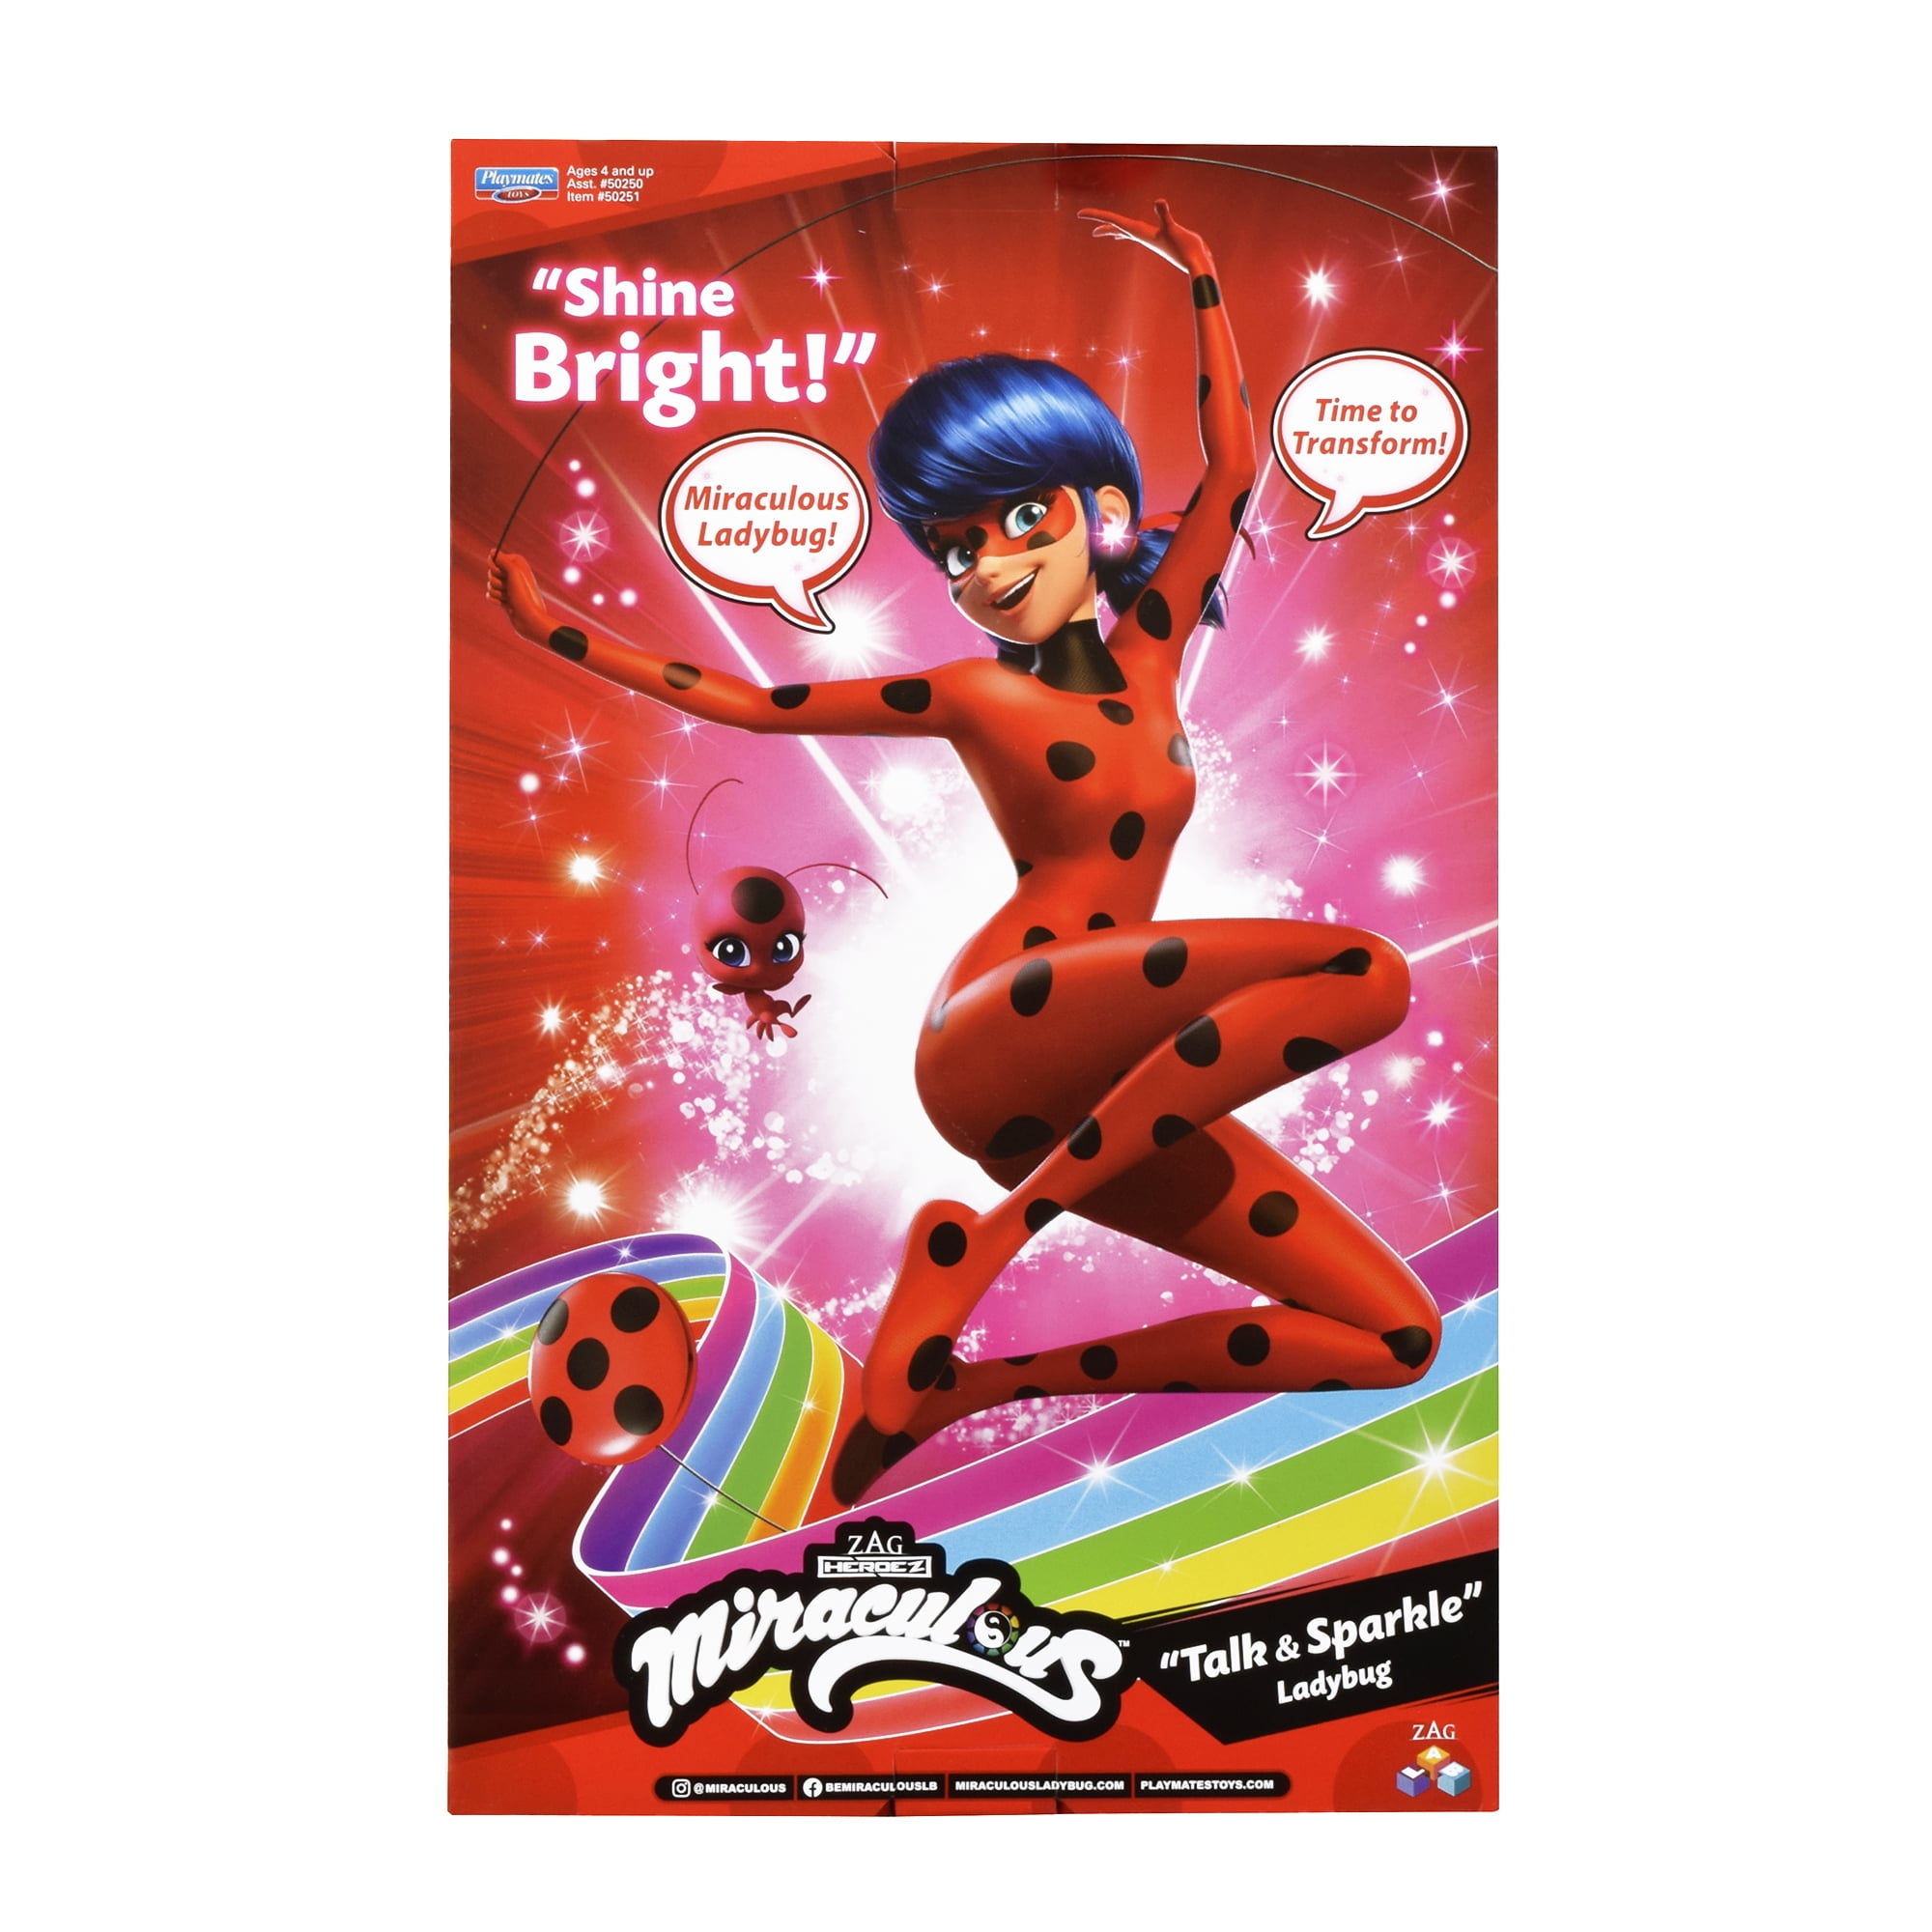 Miraculous Ladybug Deluxe Doll with Lights and Sounds